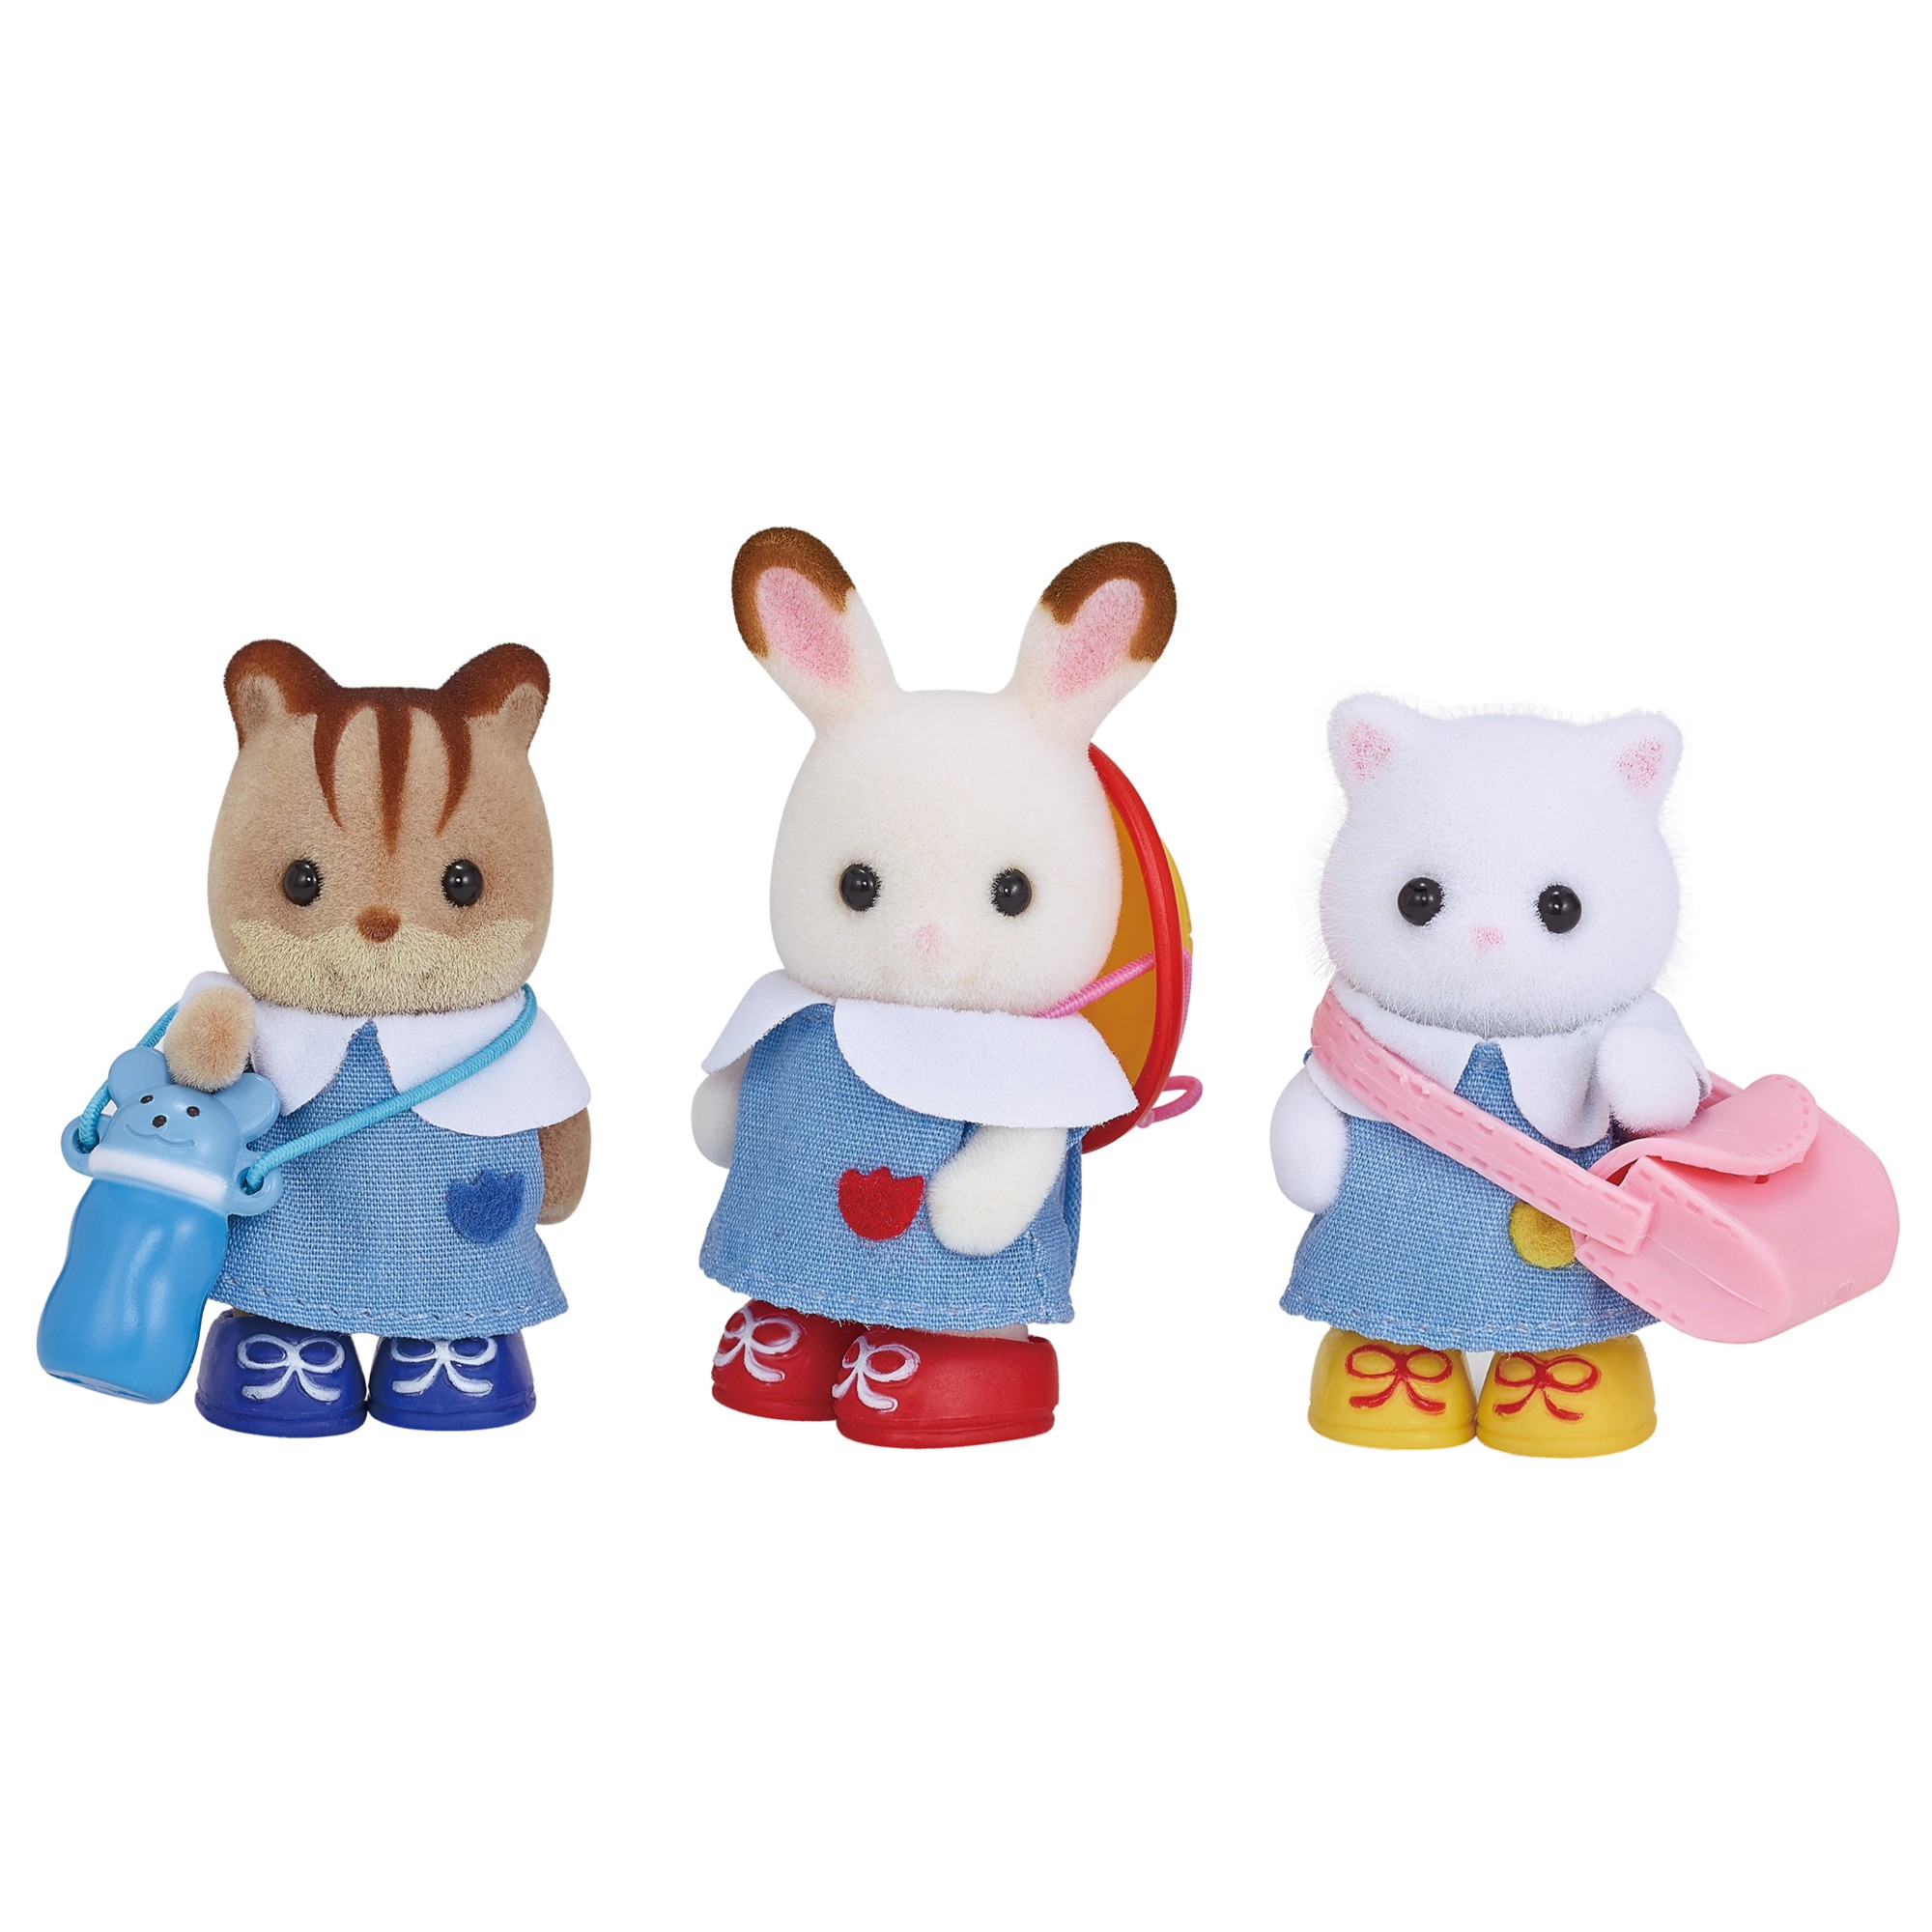 Calico Critters Nursery Friends, Set of 3 Collectible Doll Figures in Nursery School Outfits - image 1 of 4